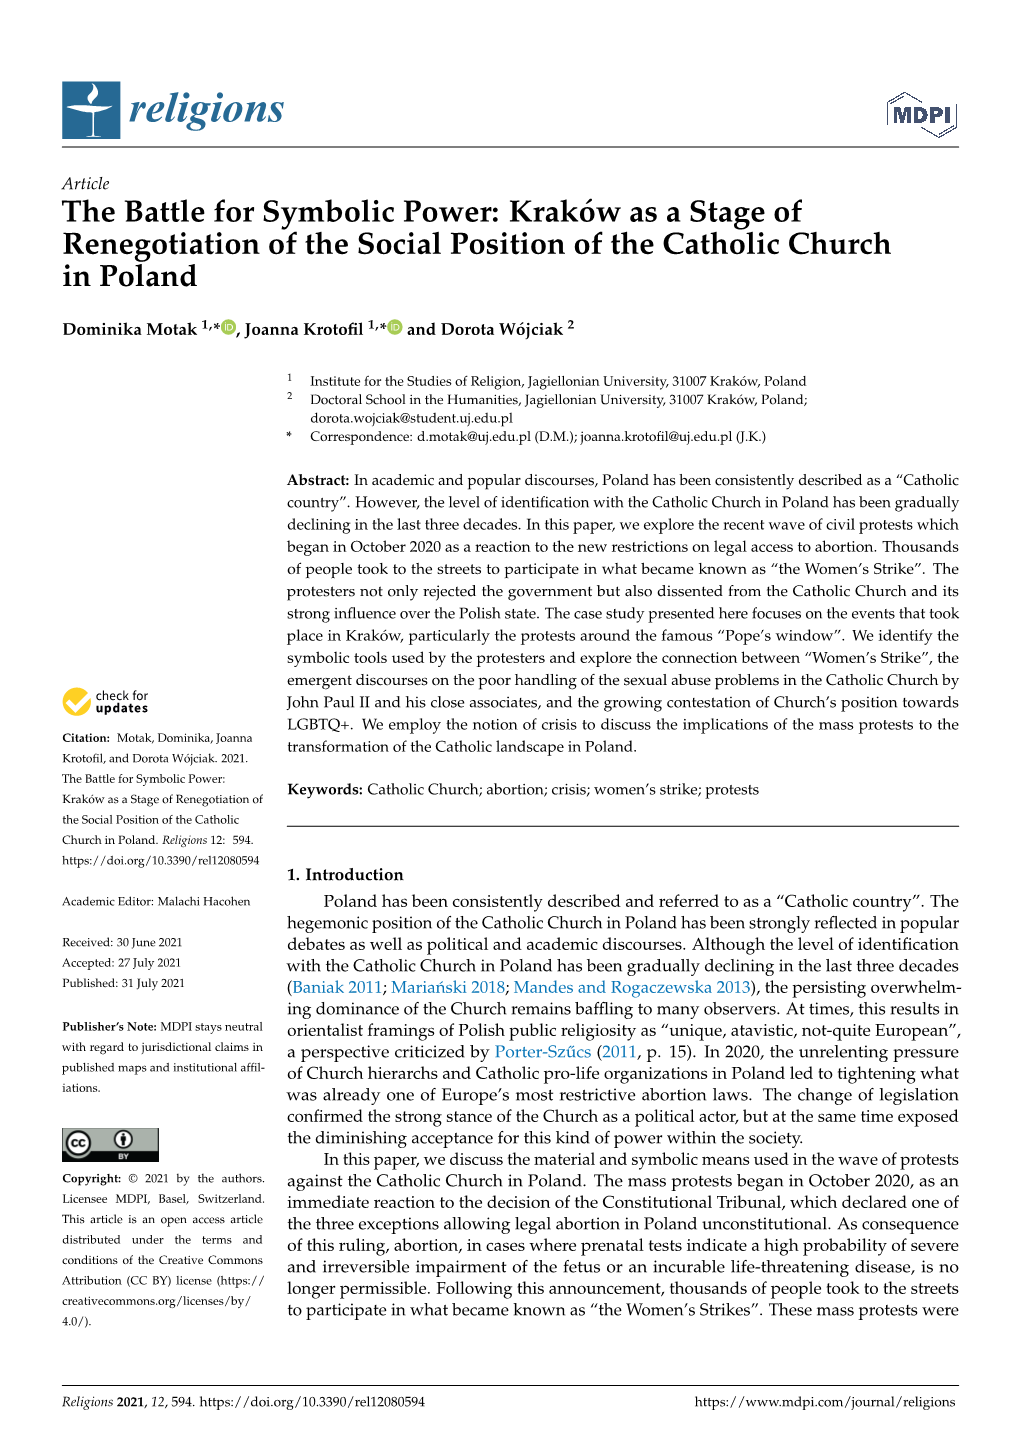 Kraków As a Stage of Renegotiation of the Social Position of the Catholic Church in Poland